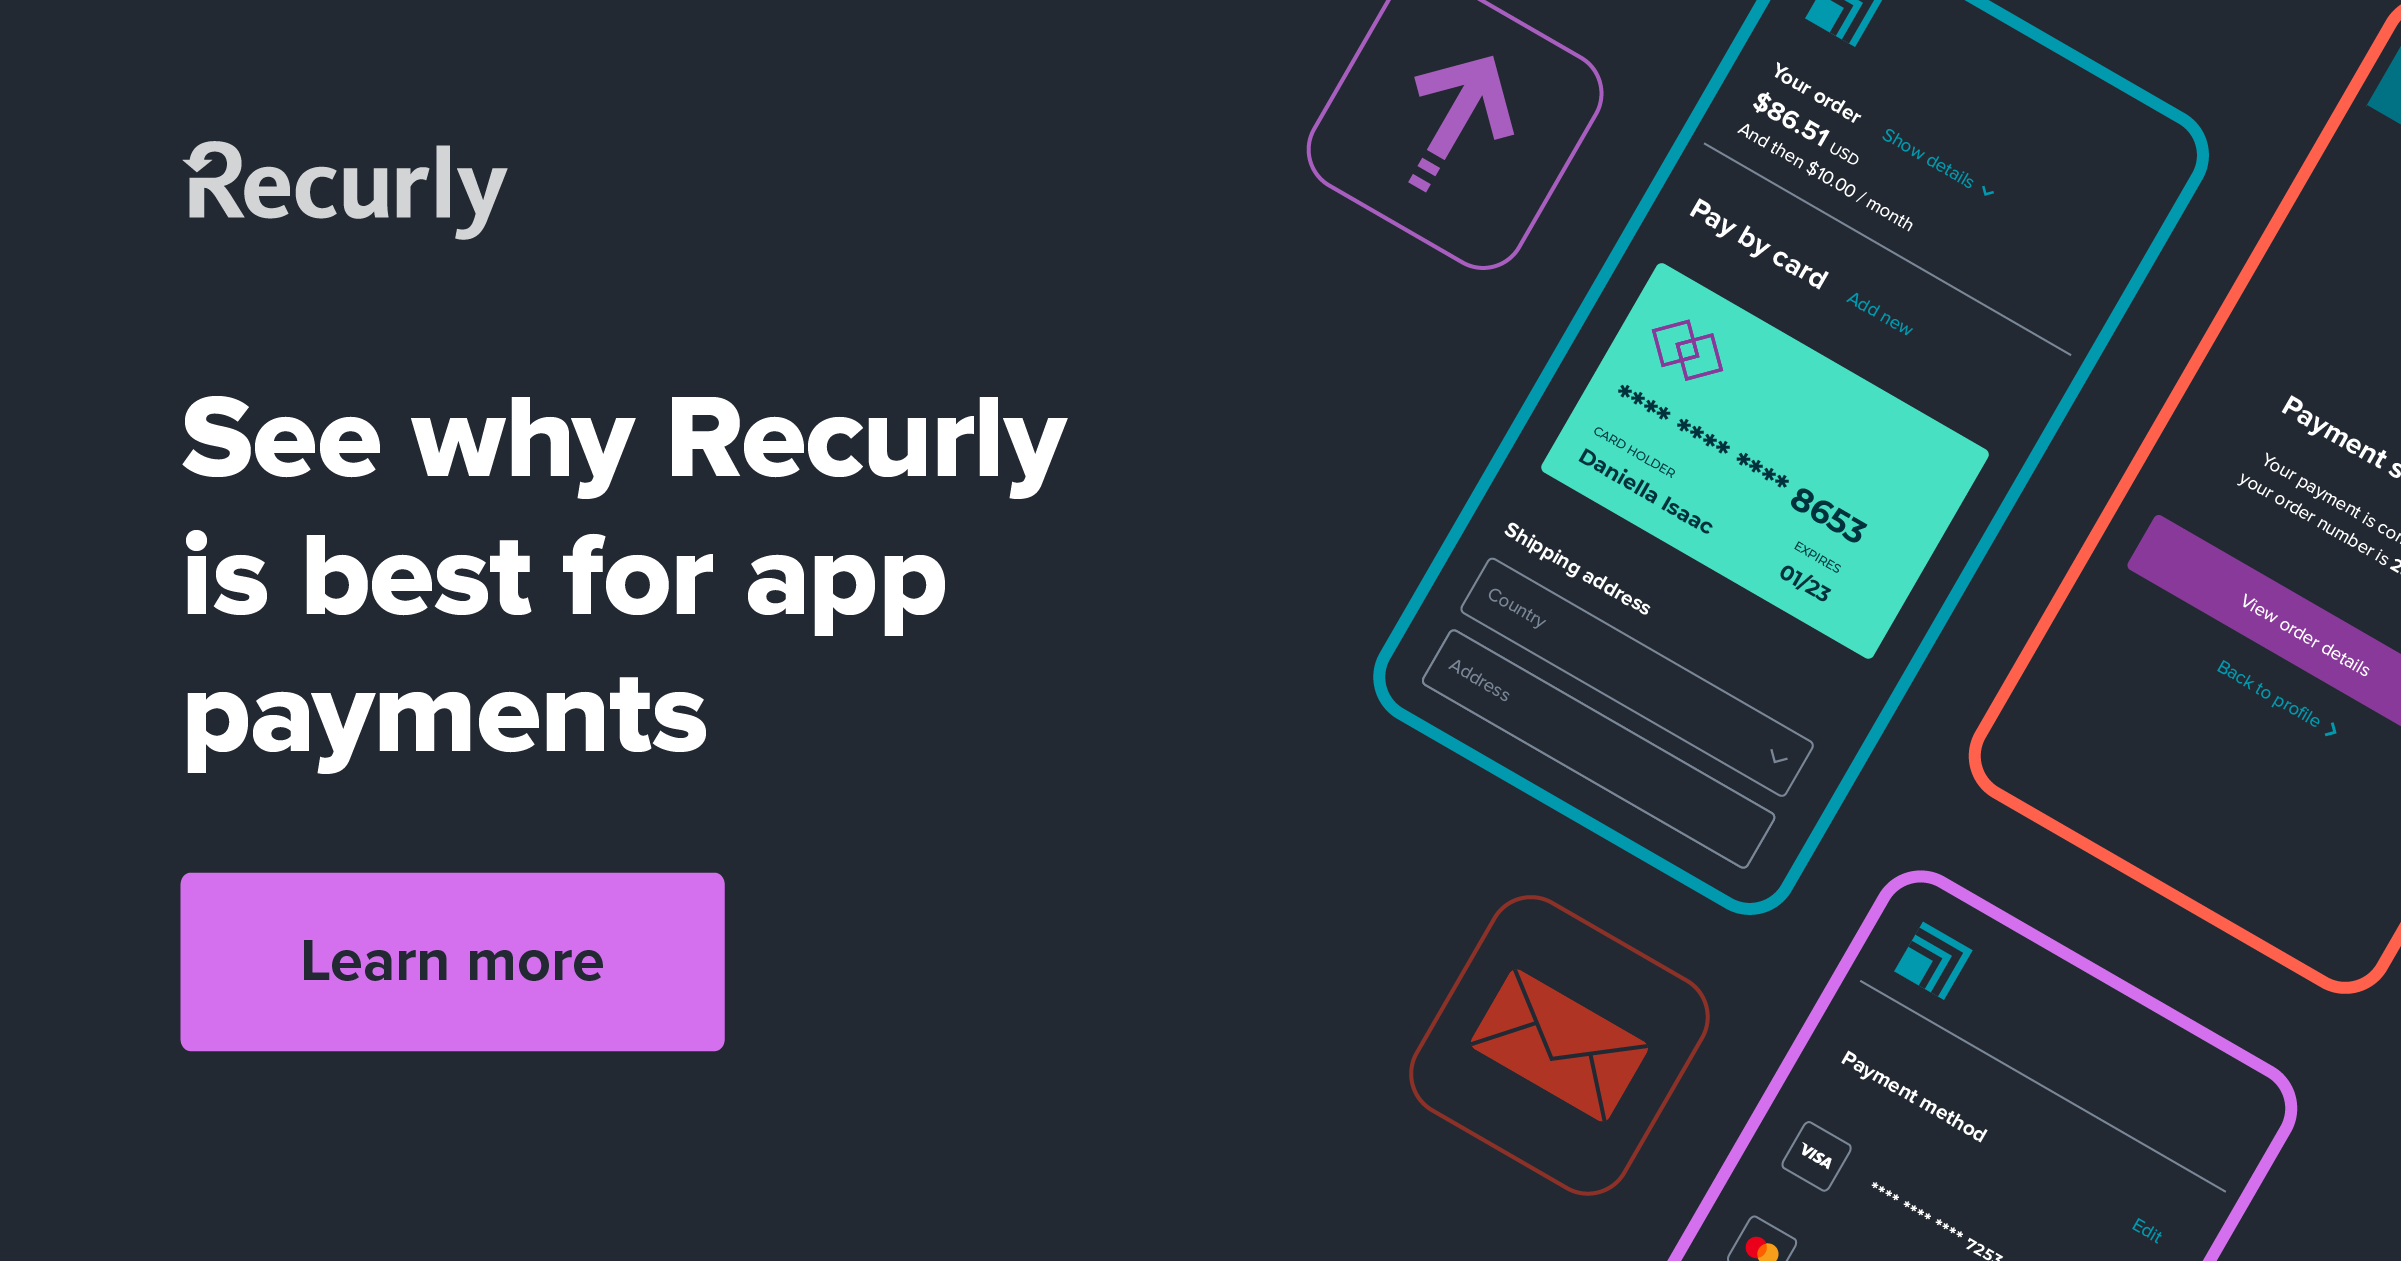 See why Recurly is best for app payments